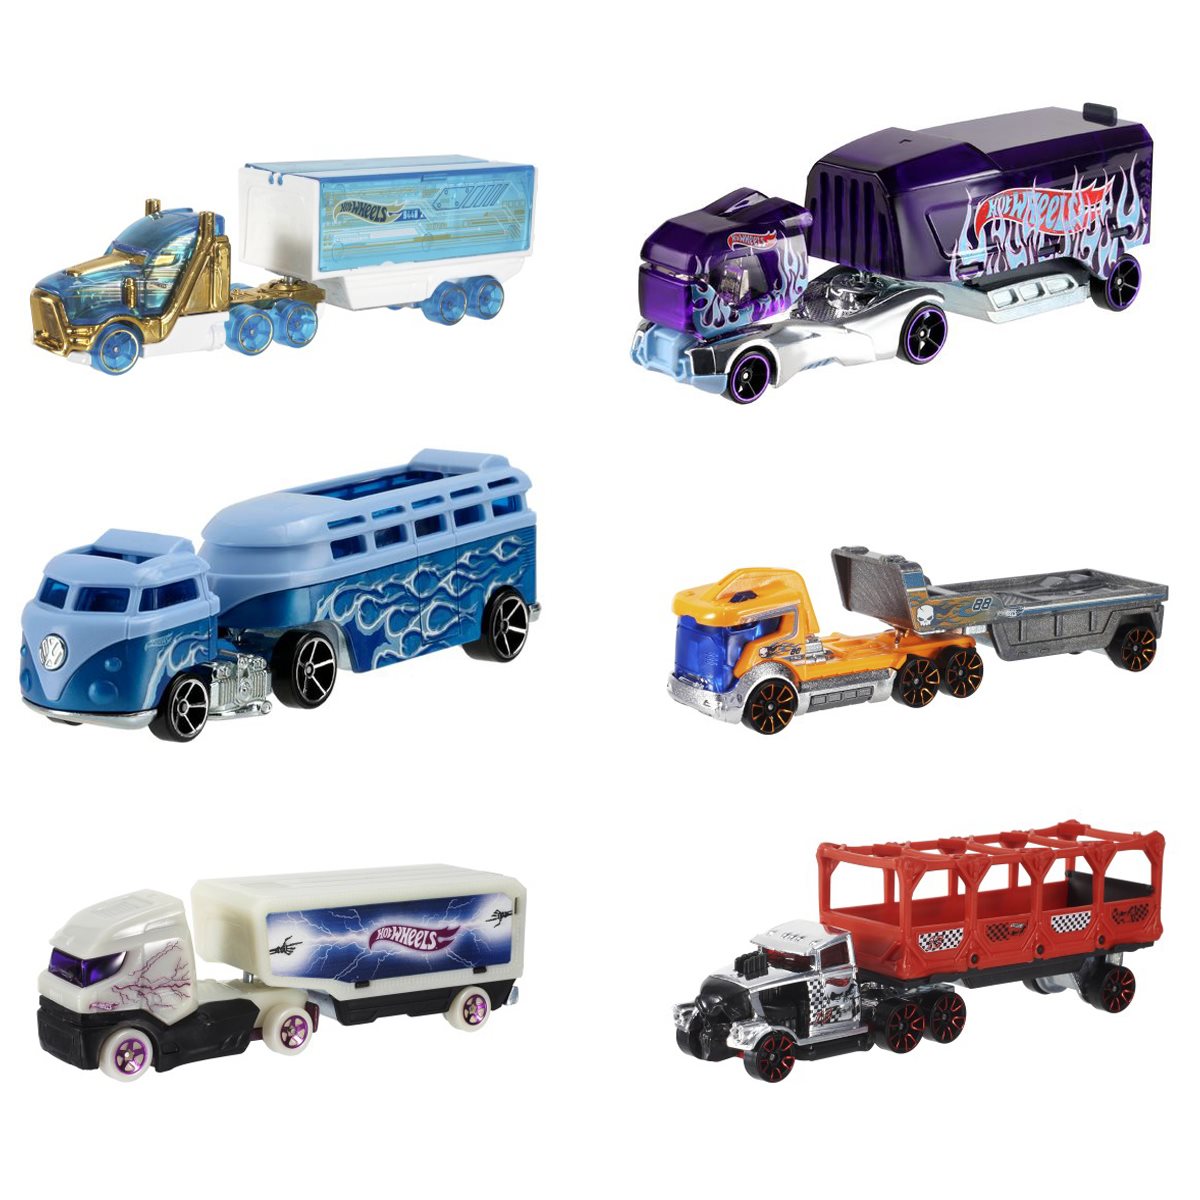 Play-Doh Mini Vehicles Wave 3 Case of 8 - Entertainment Earth